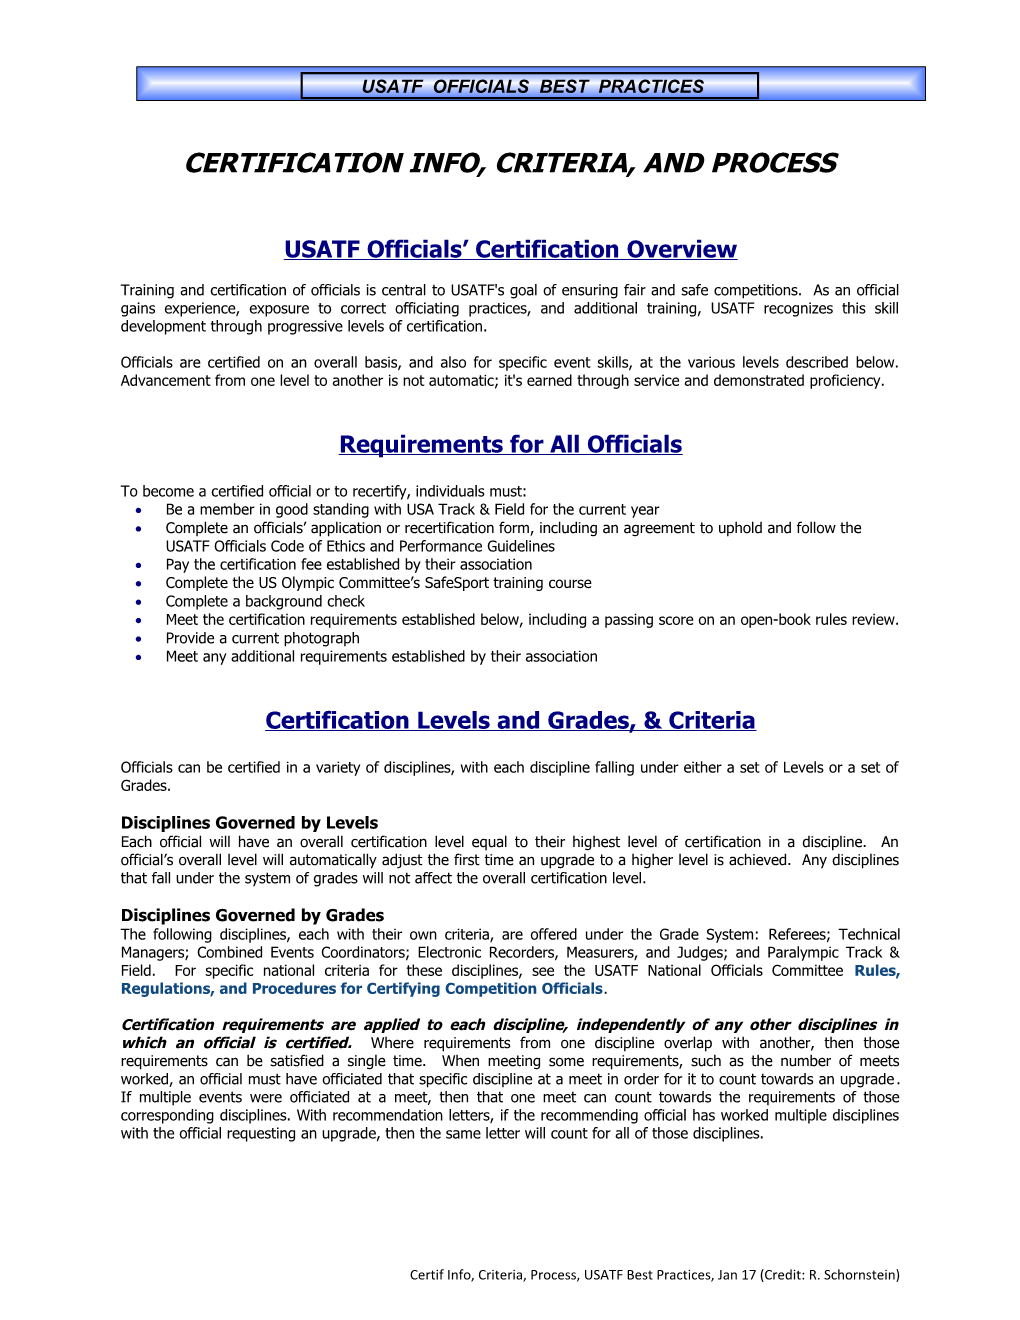 Certification Info, Criteria, and Process